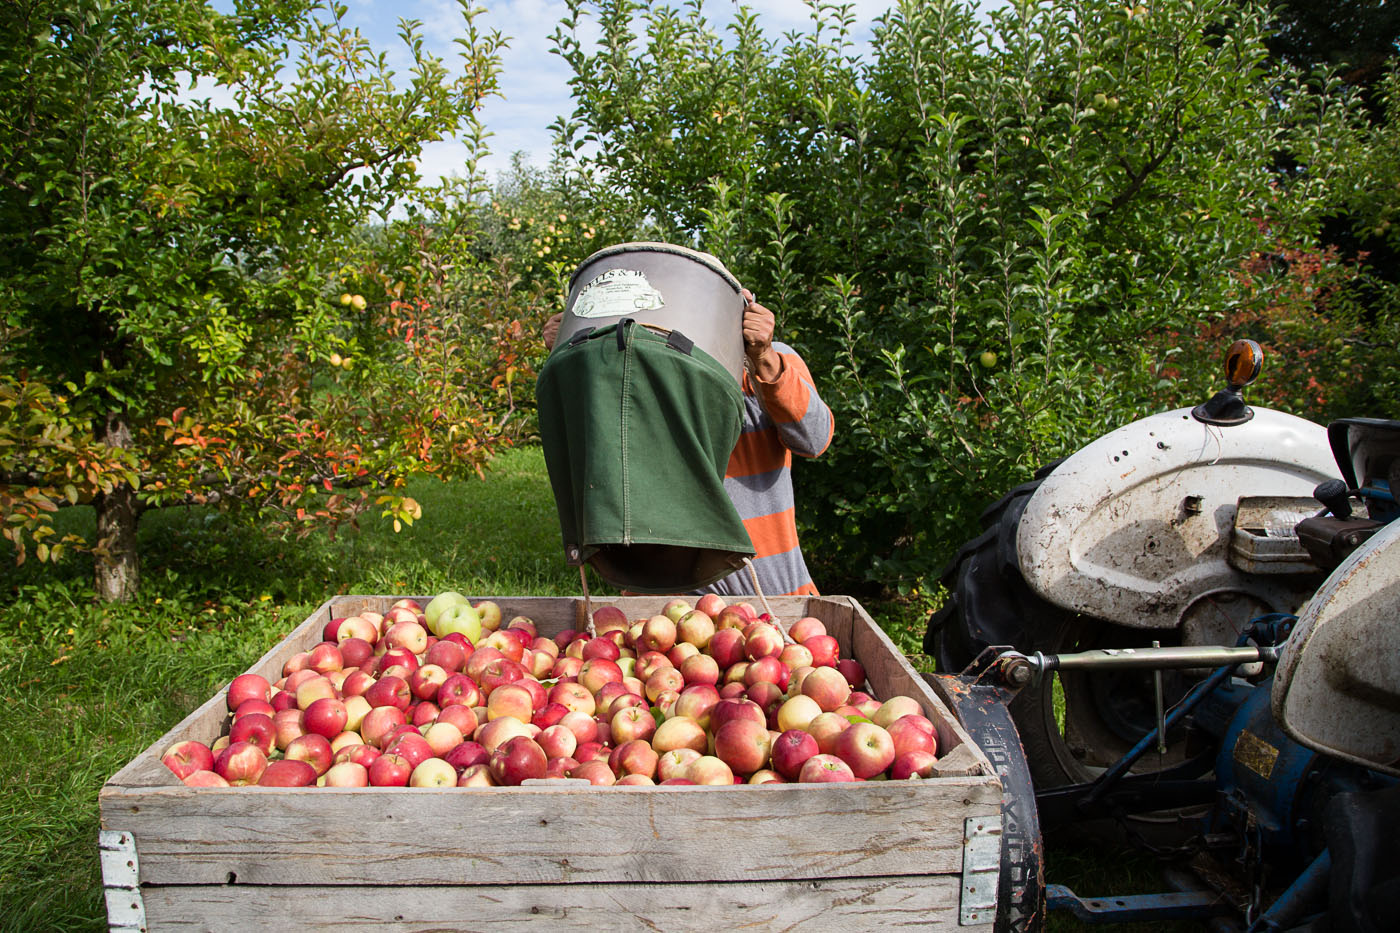 agriculture photographer Midwest - a worker harvests apples in an orchard